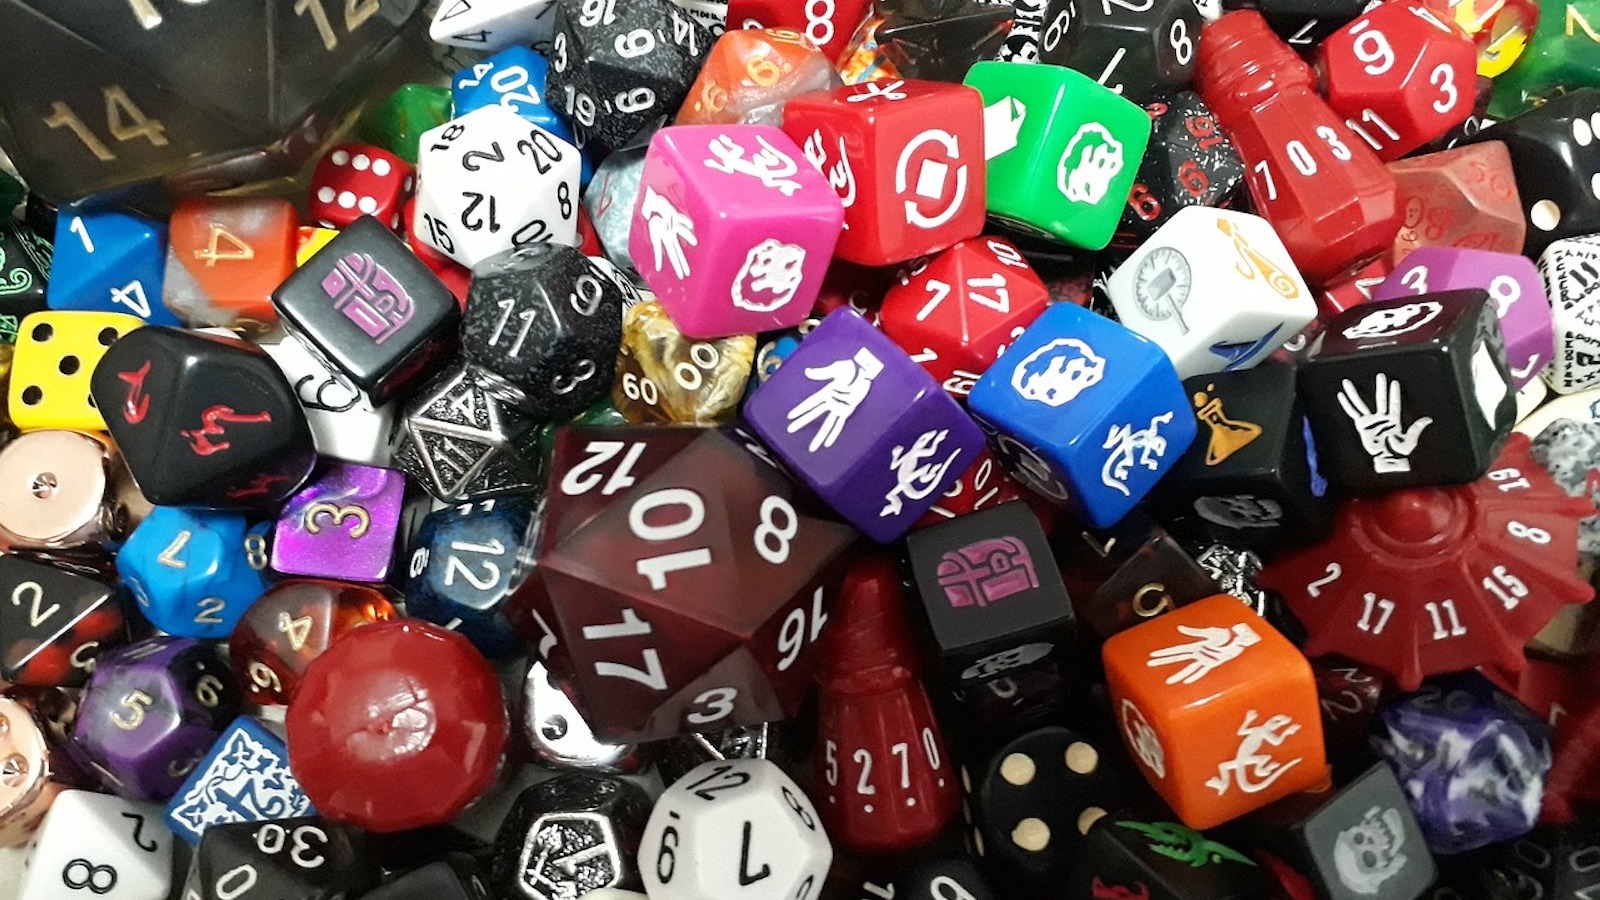 Piles of game dice